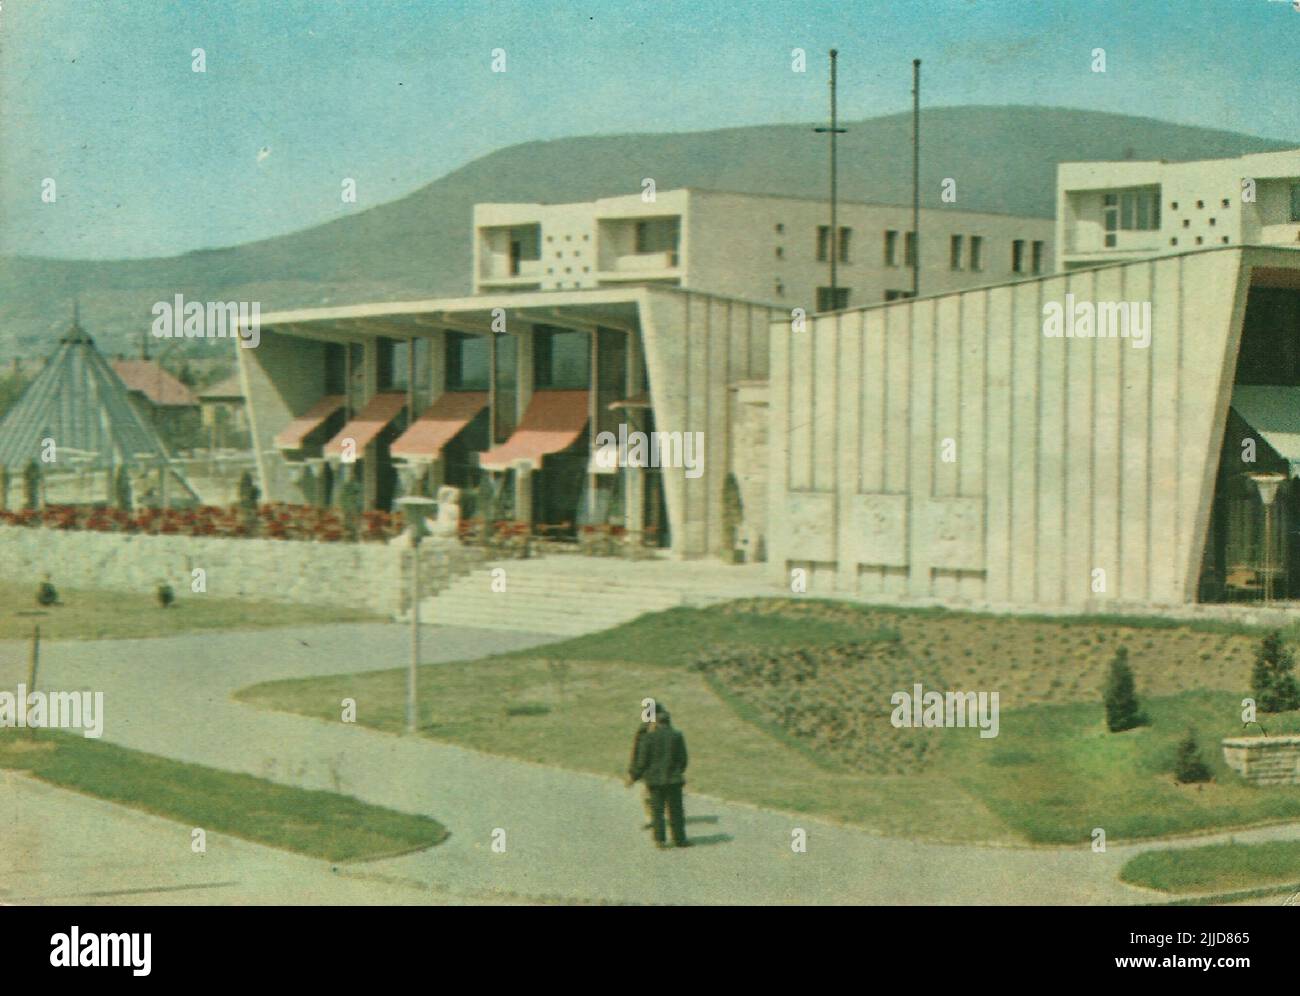 Olympics restaurant. Postcard of the Olimpia Restaurant in Pécs. The Local History Collection of Csorba Gyz Könyvtár Library has been collecting photos and postcards related to Baranya County since January 1966. According to the data updated on 1st February 2016, the collection consists of 11,565 copies. As the result of the digitisation project that started in 2012, the Collection includes about 59,000 black-and-white and coloured records of different sizes and types, which are searchable through the electronic catalogue. The famous postcard collector Tibor Endre Tóth has procured a postcard- Stock Photo